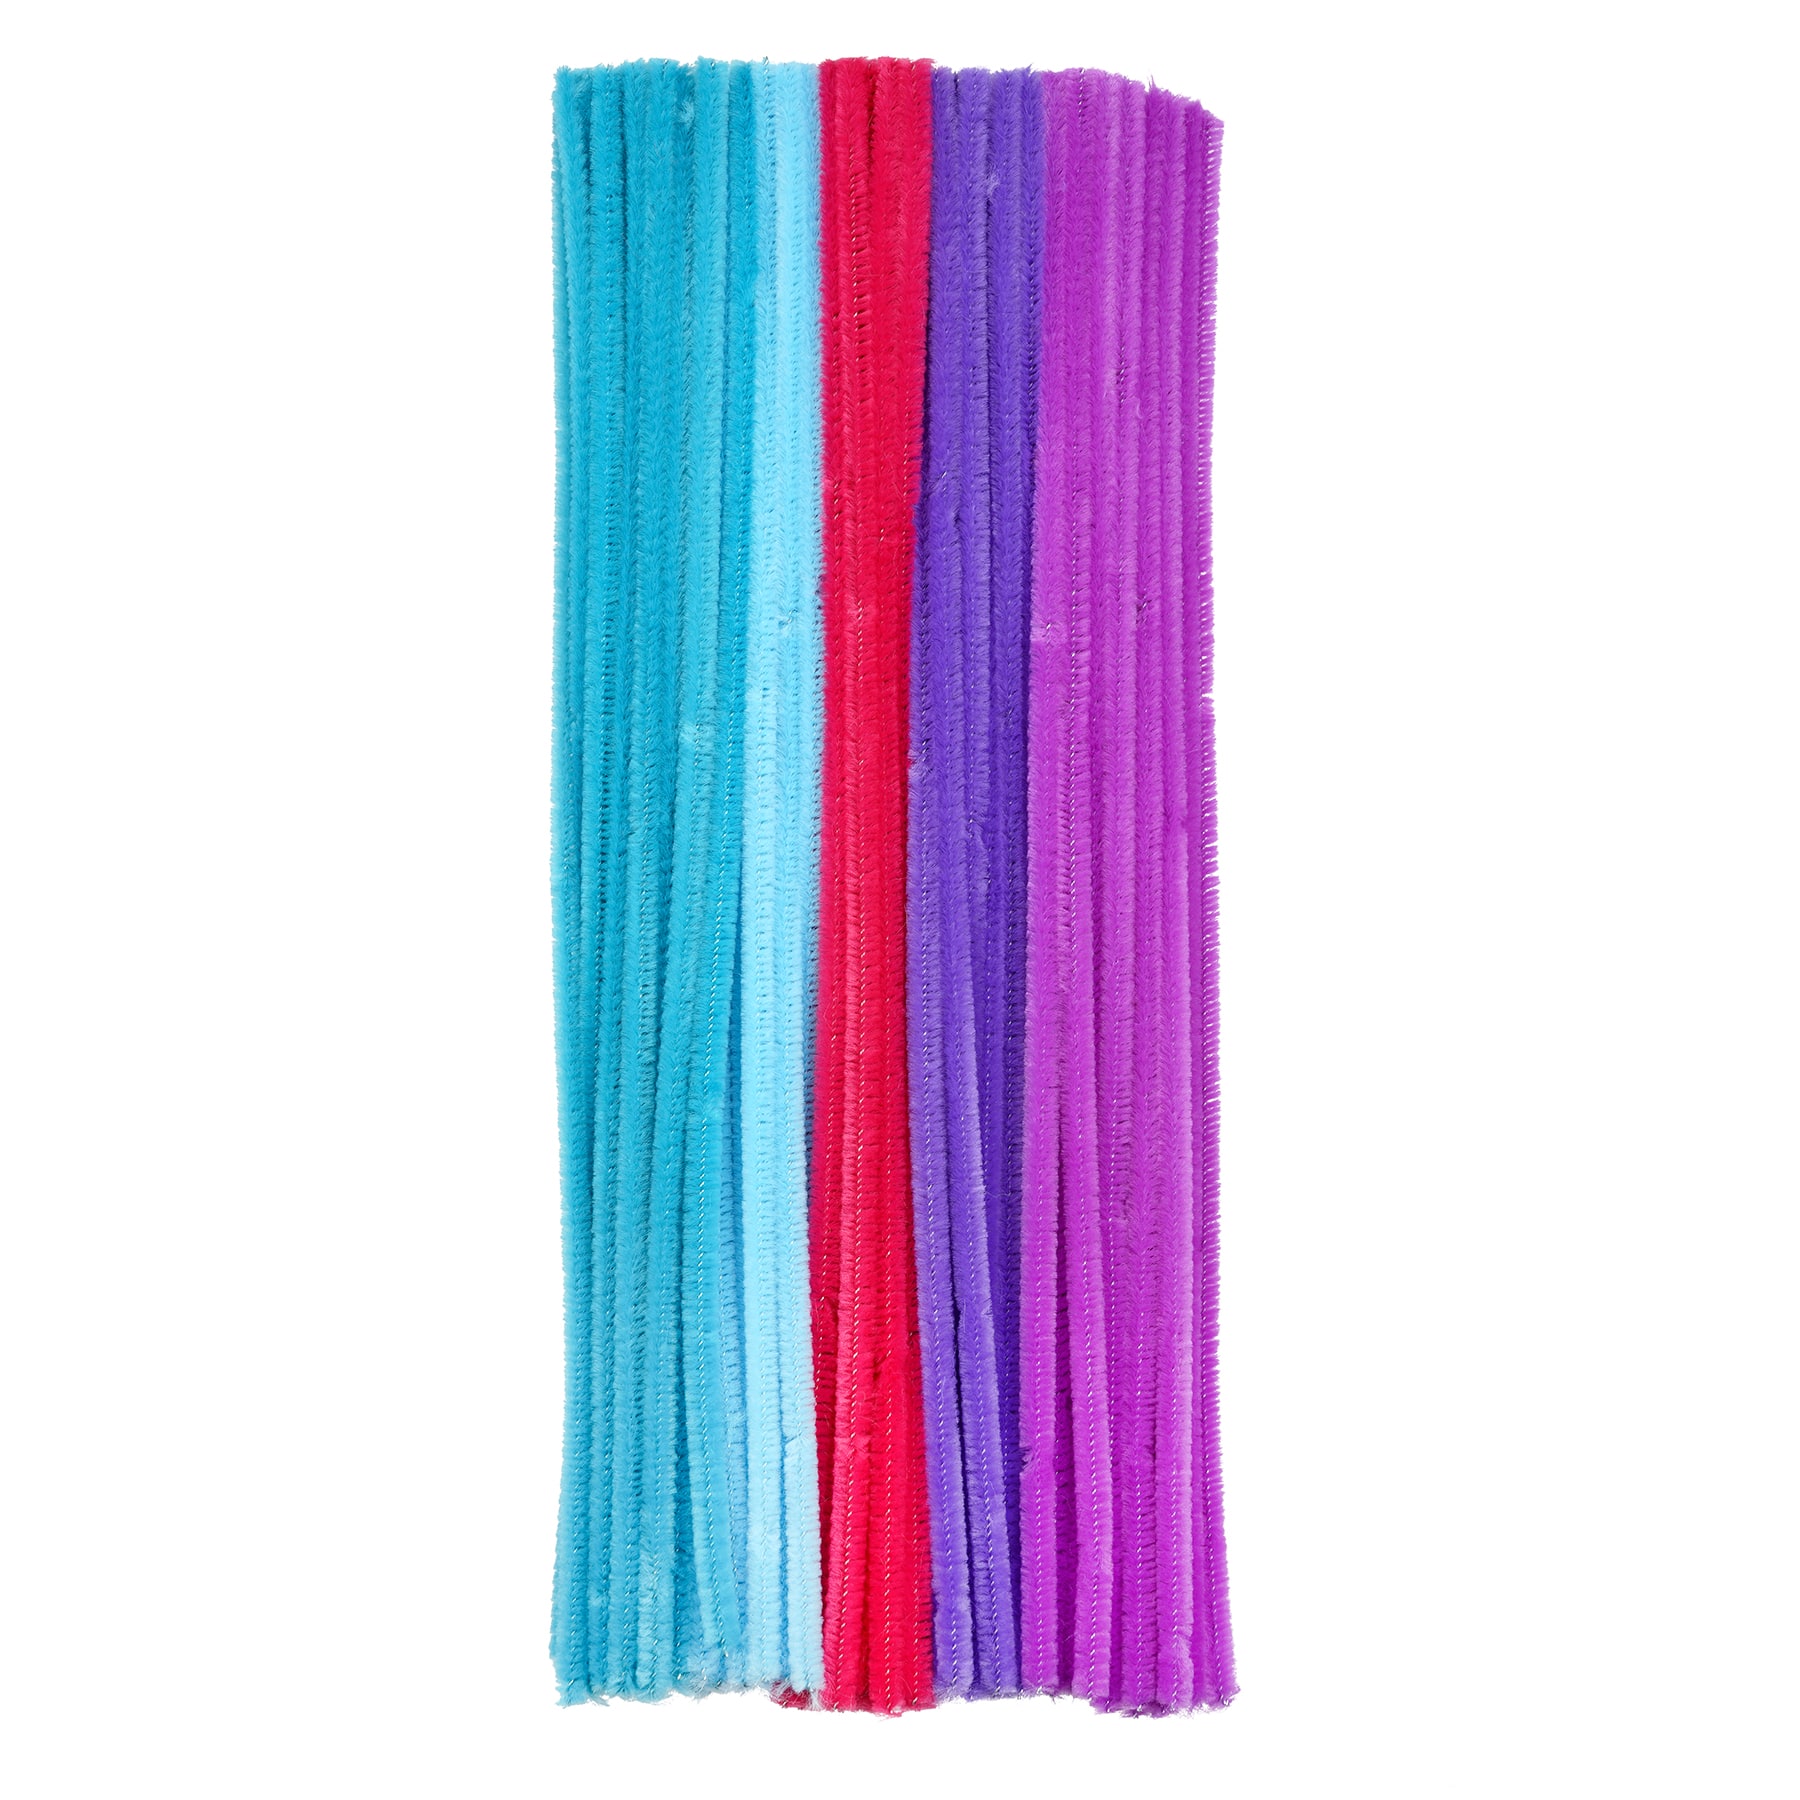 12 Packs: 100 ct. (1,200 total) Candy Color Chenille Pipe Cleaners by Creatology&#x2122;